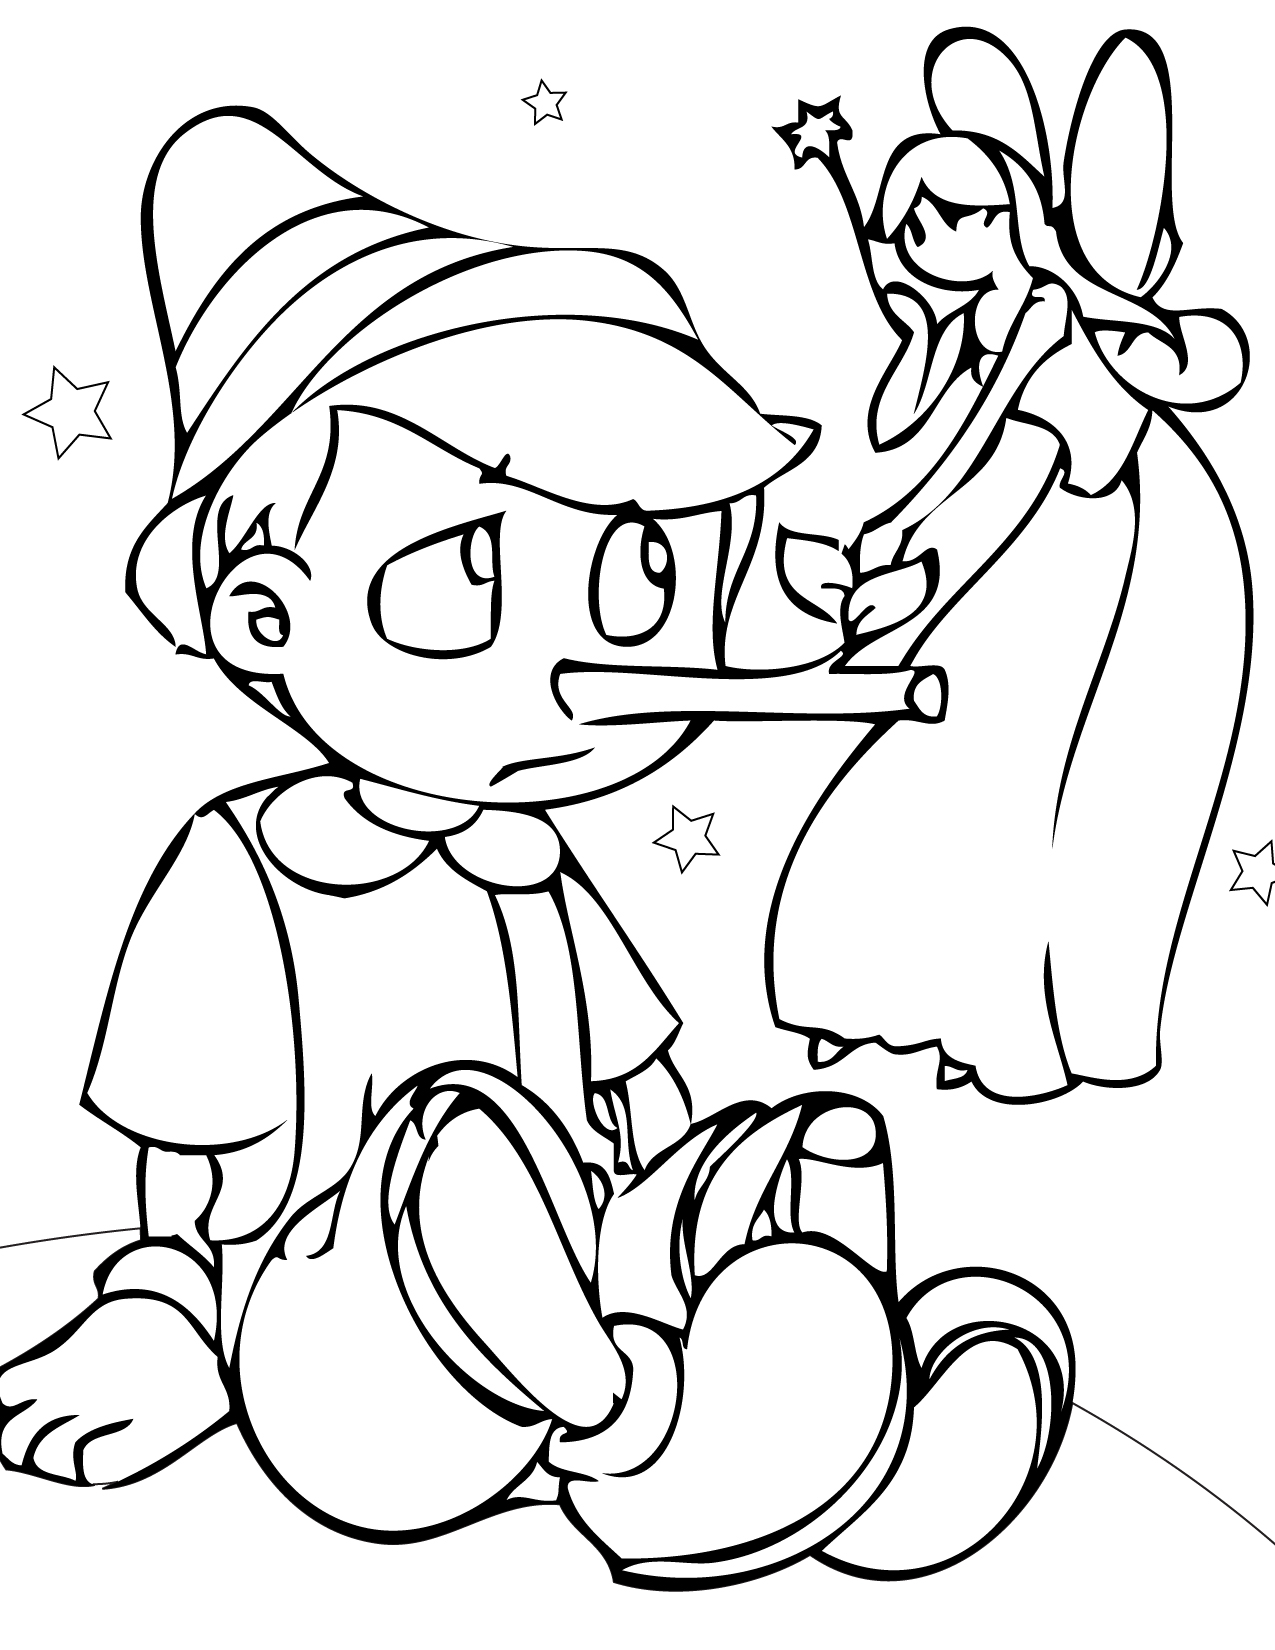 pinocchio story in coloring pictures